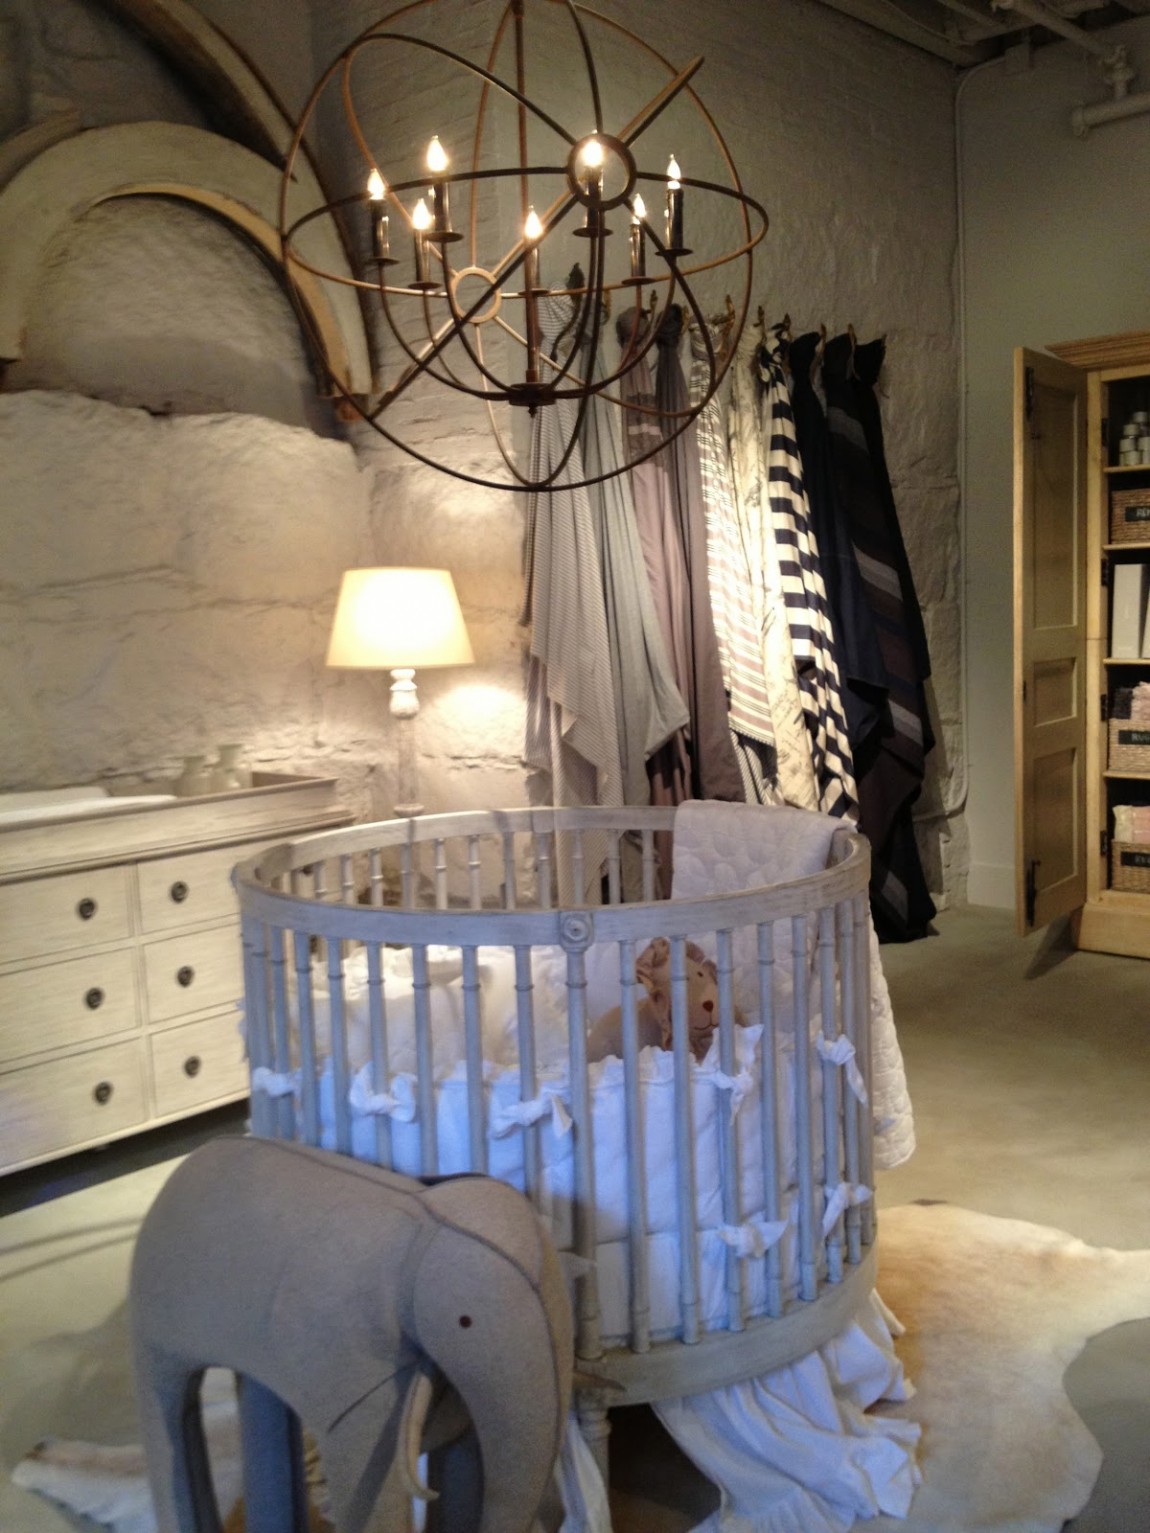 Home Baby With Warm Home Baby Room Designed With Unique Textured Grey Wall Hit By White Skirted Round Crib With Chandelier Dream Homes Adorable Round Crib Decorated By Vintage Ornaments In Small Room